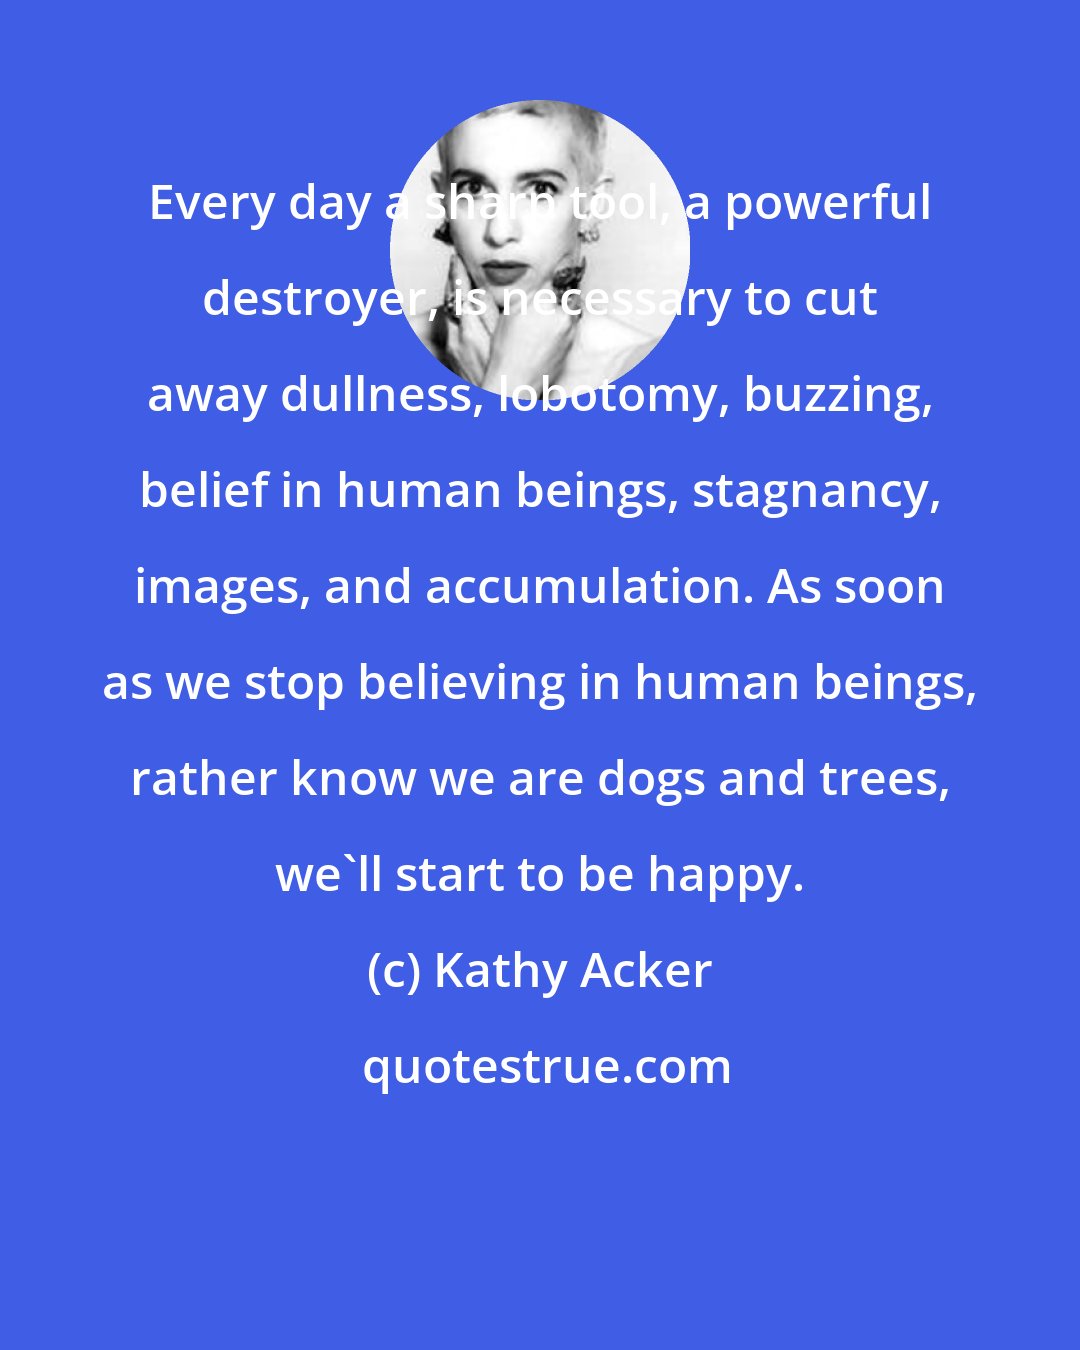 Kathy Acker: Every day a sharp tool, a powerful destroyer, is necessary to cut away dullness, lobotomy, buzzing, belief in human beings, stagnancy, images, and accumulation. As soon as we stop believing in human beings, rather know we are dogs and trees, we'll start to be happy.